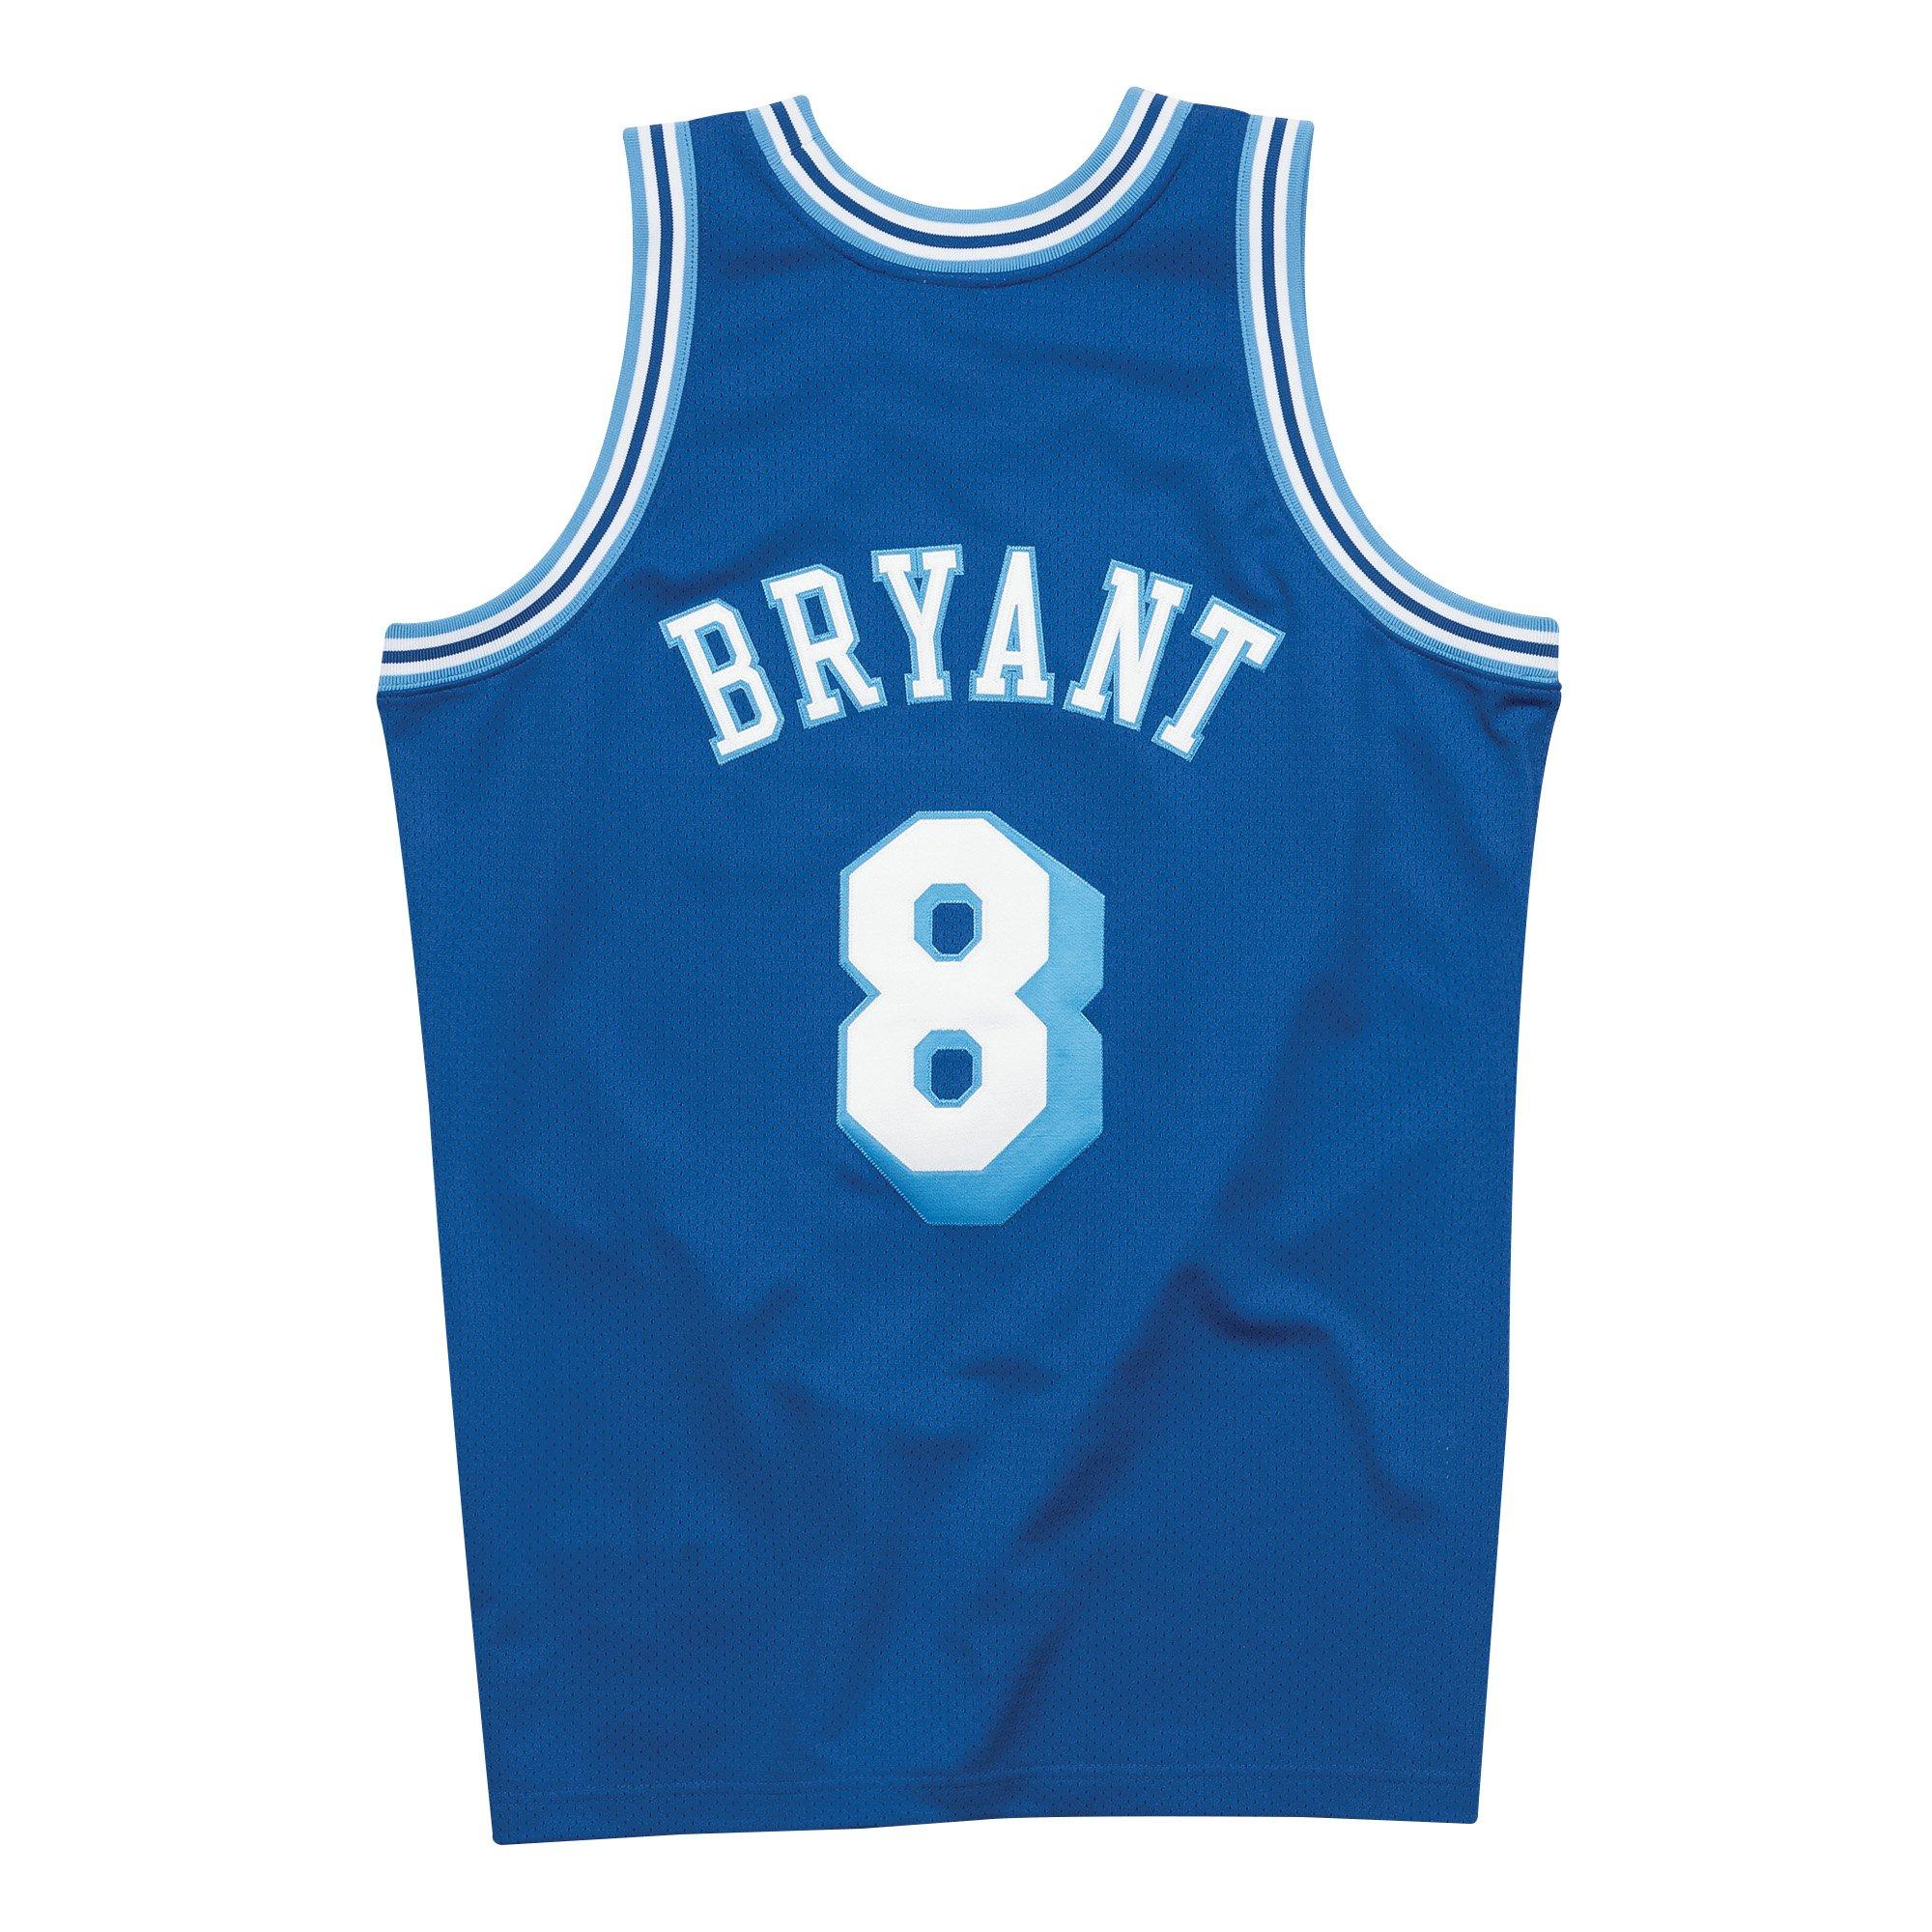 lakers bryant 8 jersey